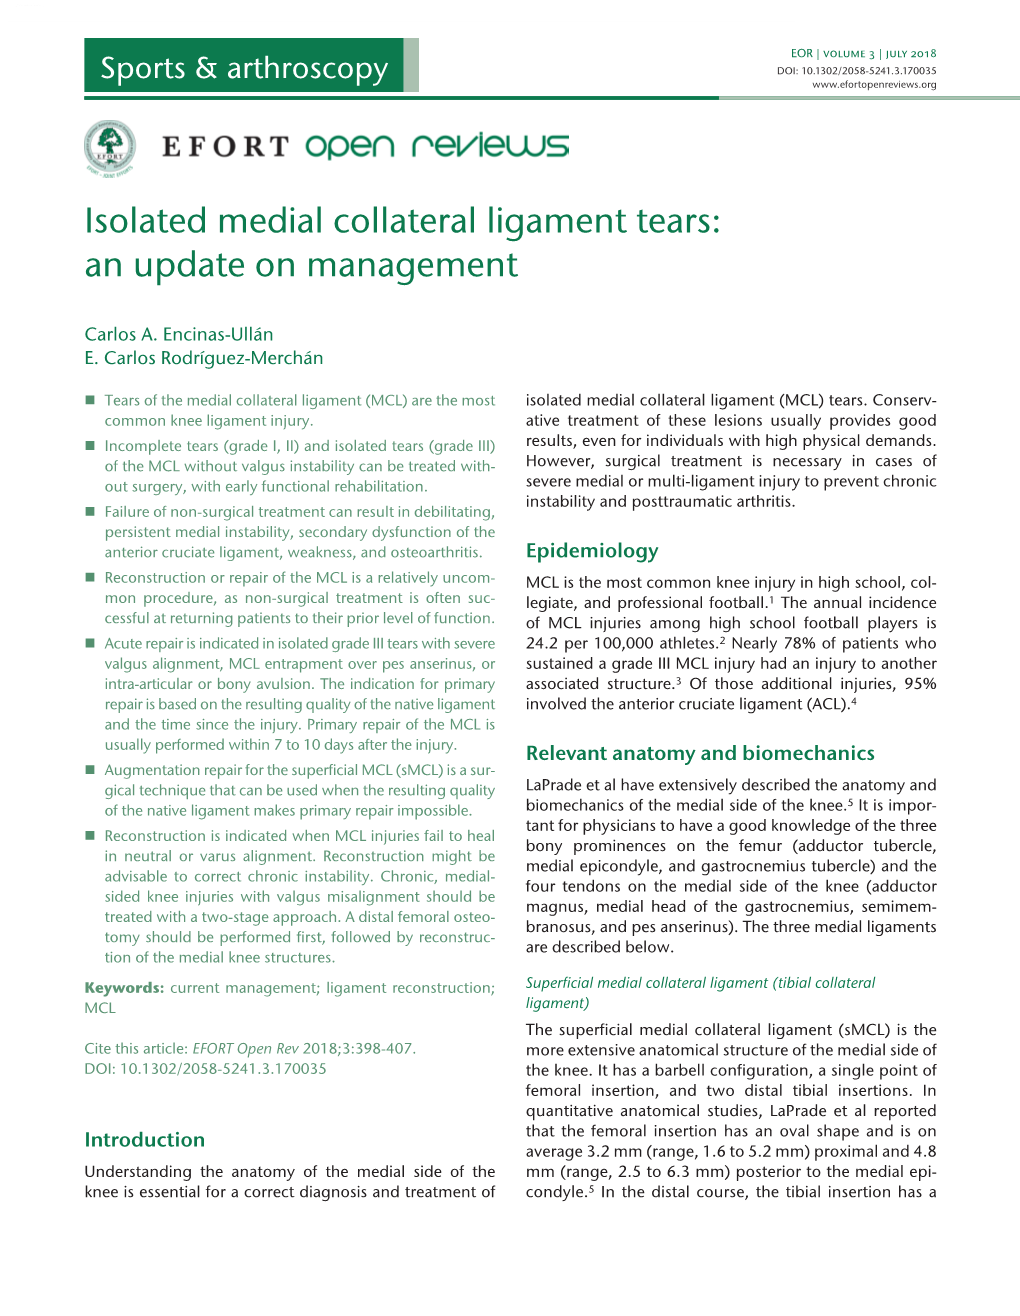 Isolated Medial Collateral Ligament Tears: an Update on Management